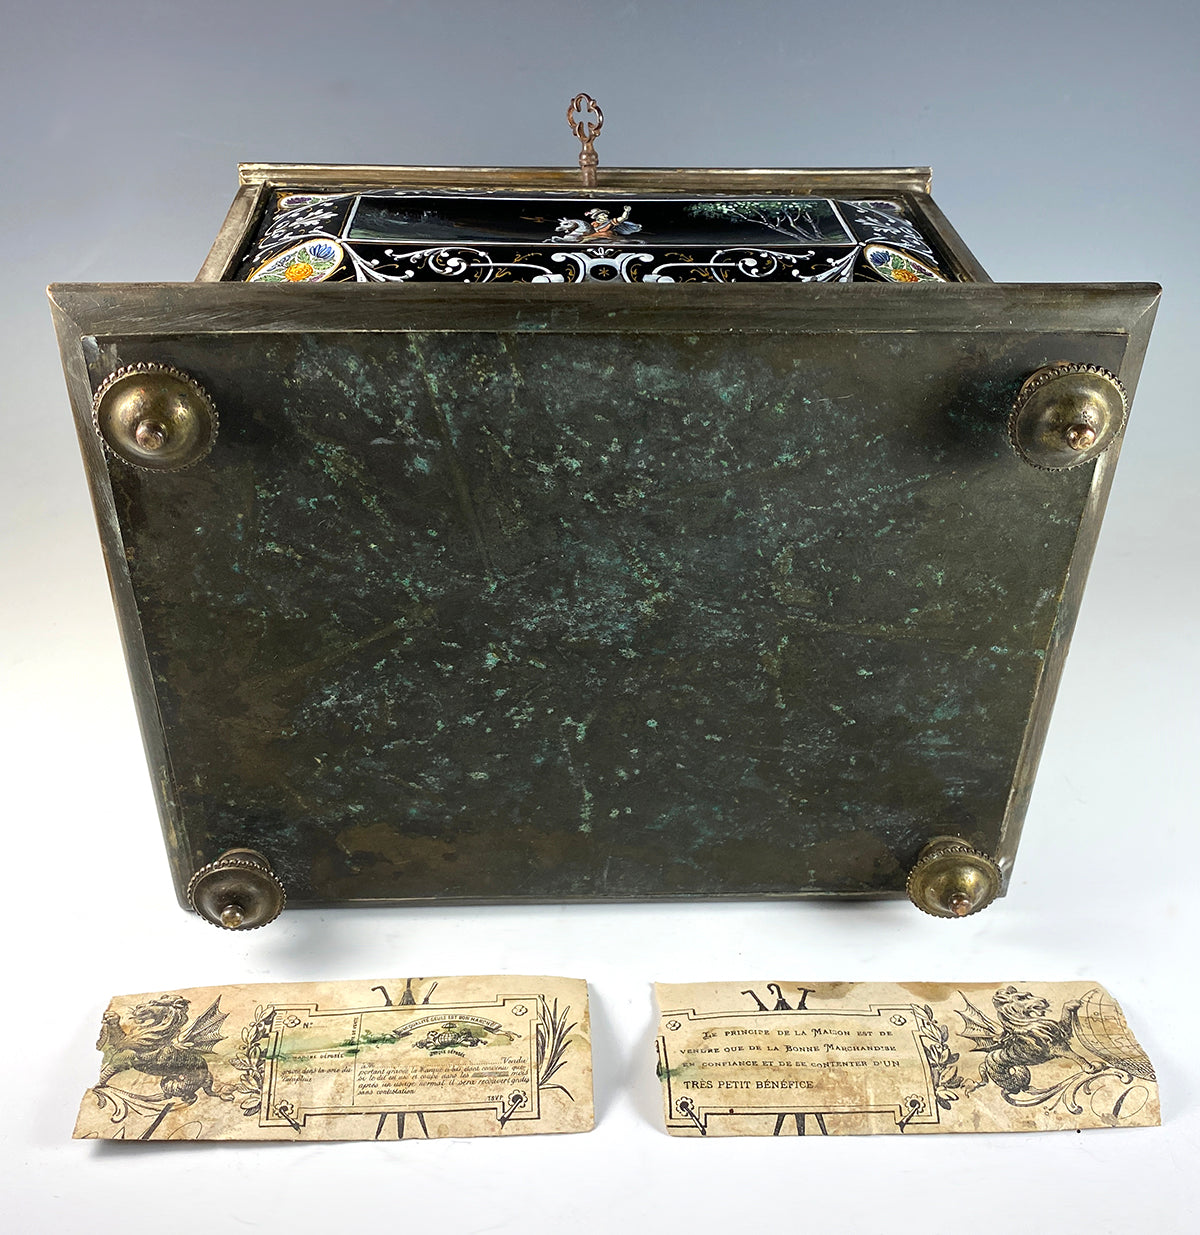 RARE Antique early 19th C French Limoges Kiln-fired Enamel Chest, Casket, Large Box